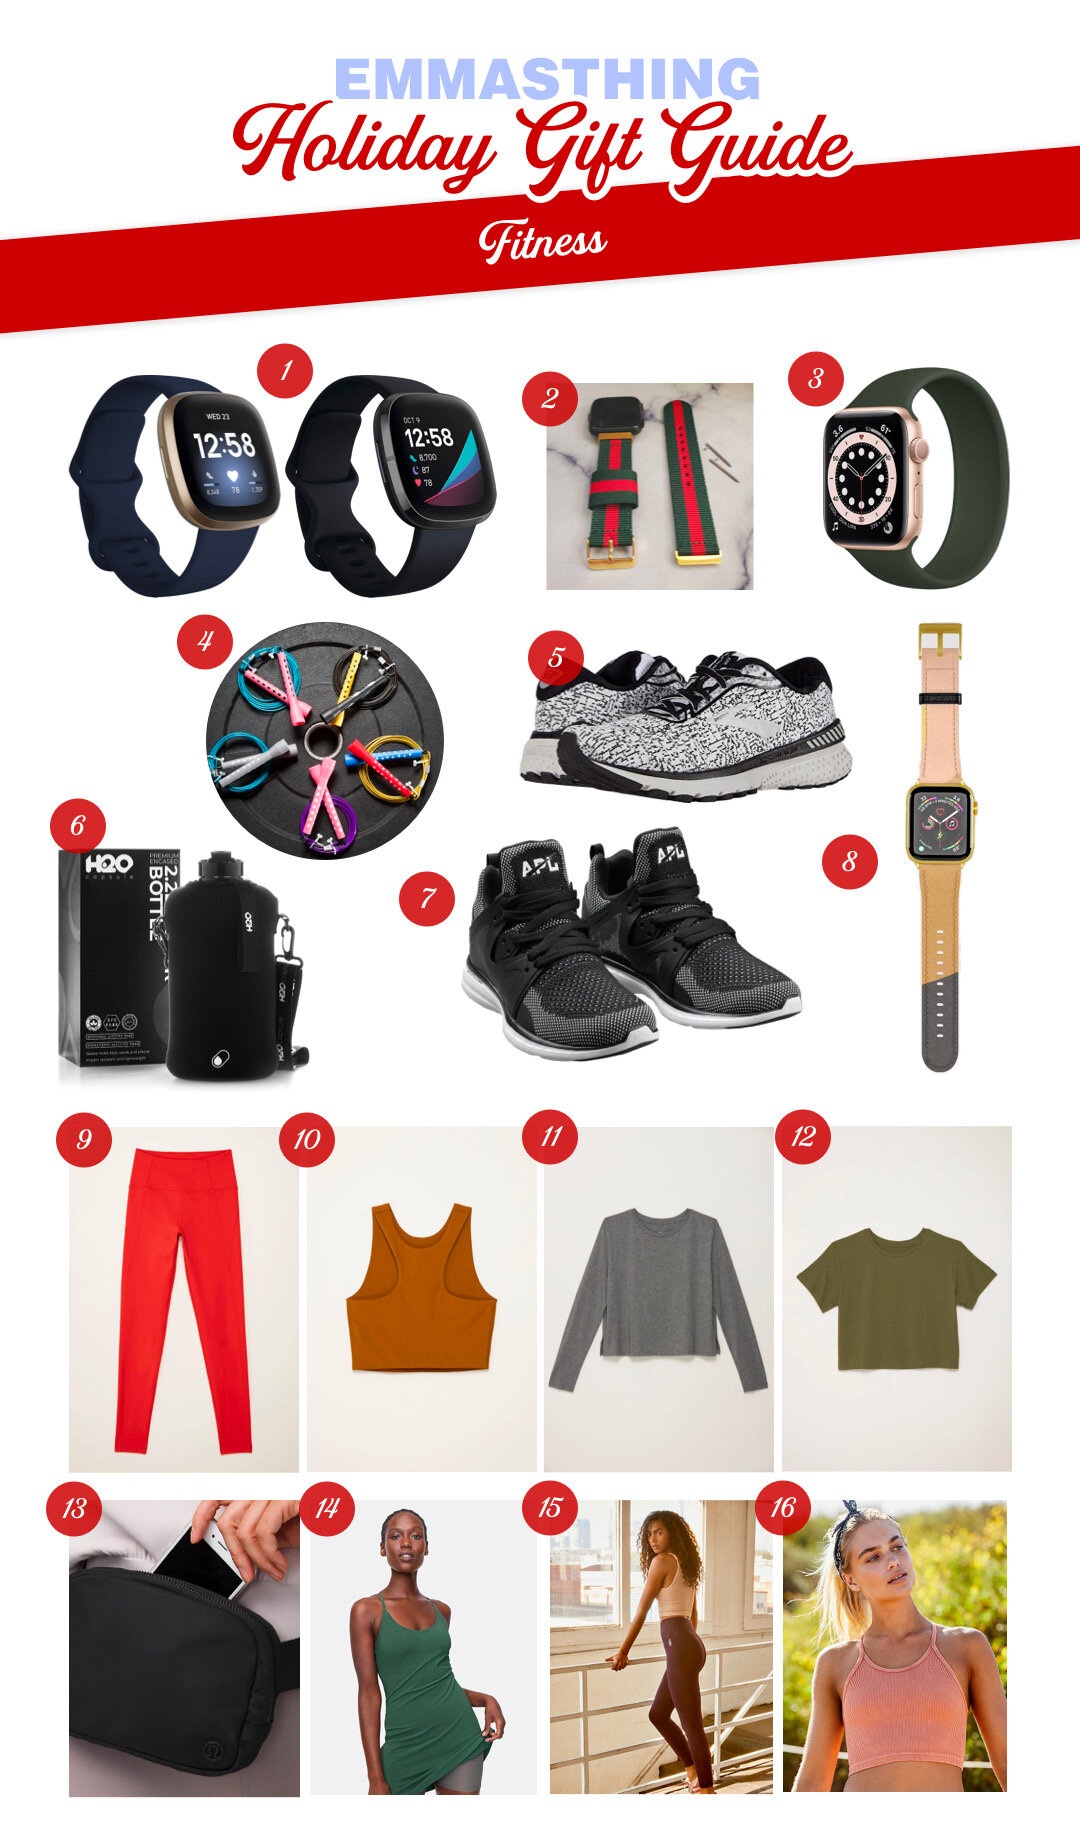 2016 Holiday Gift Guide: Sports/Fitness